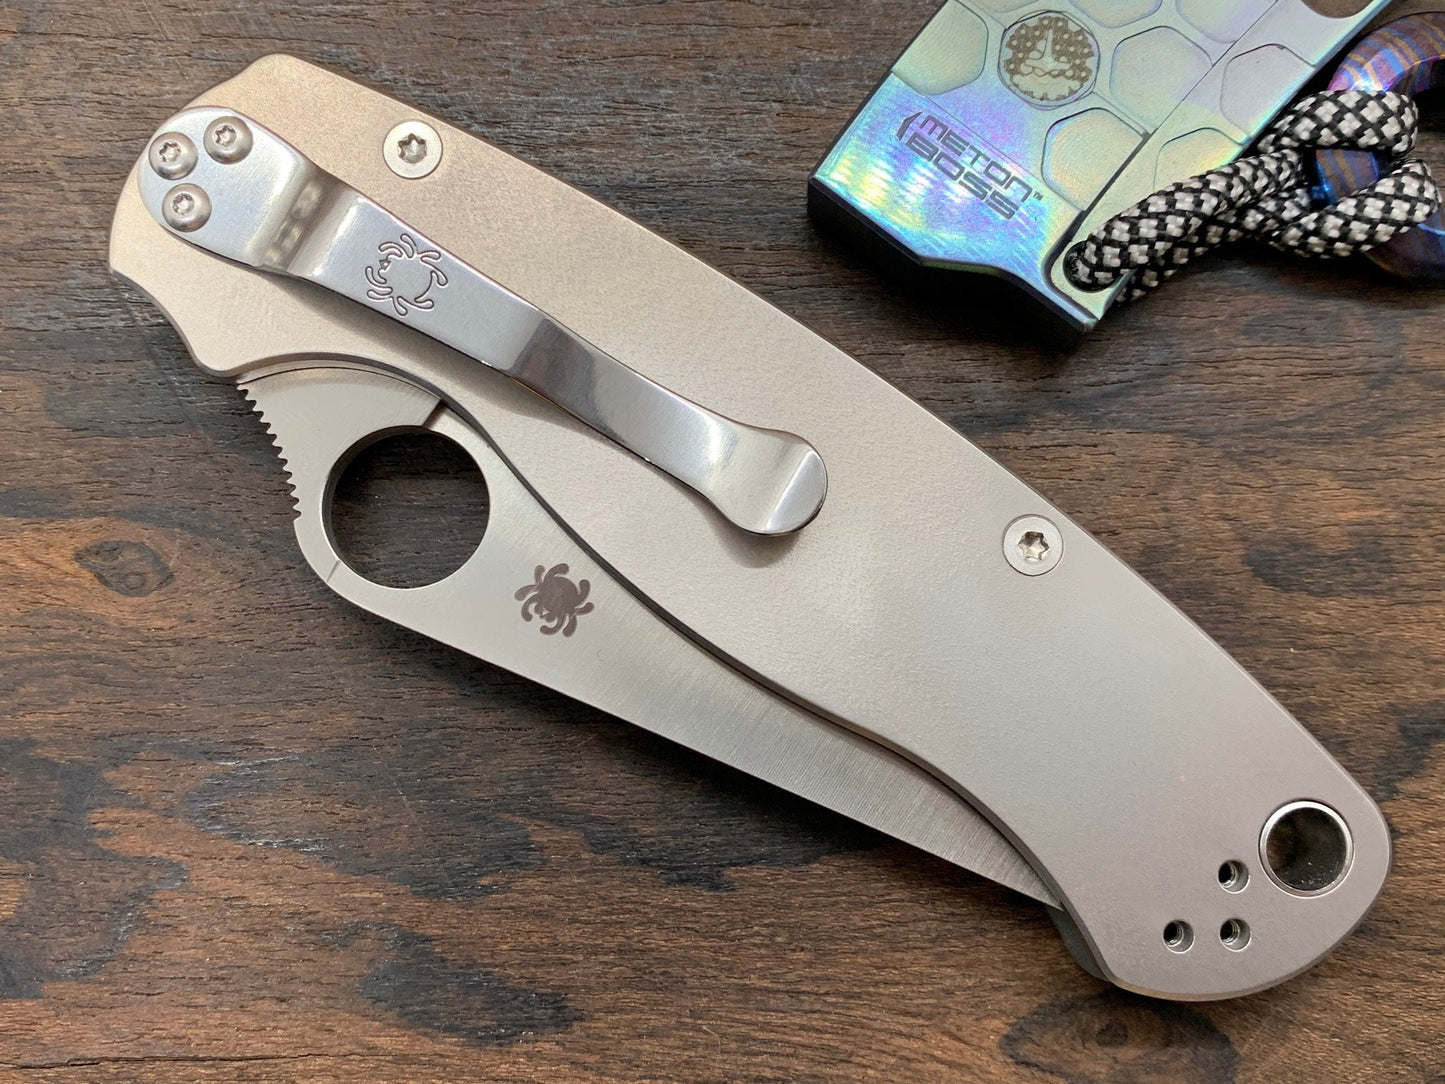 CIRCUIT BOARD engraved Titanium scales for Spyderco Paramilitary 2 PM2